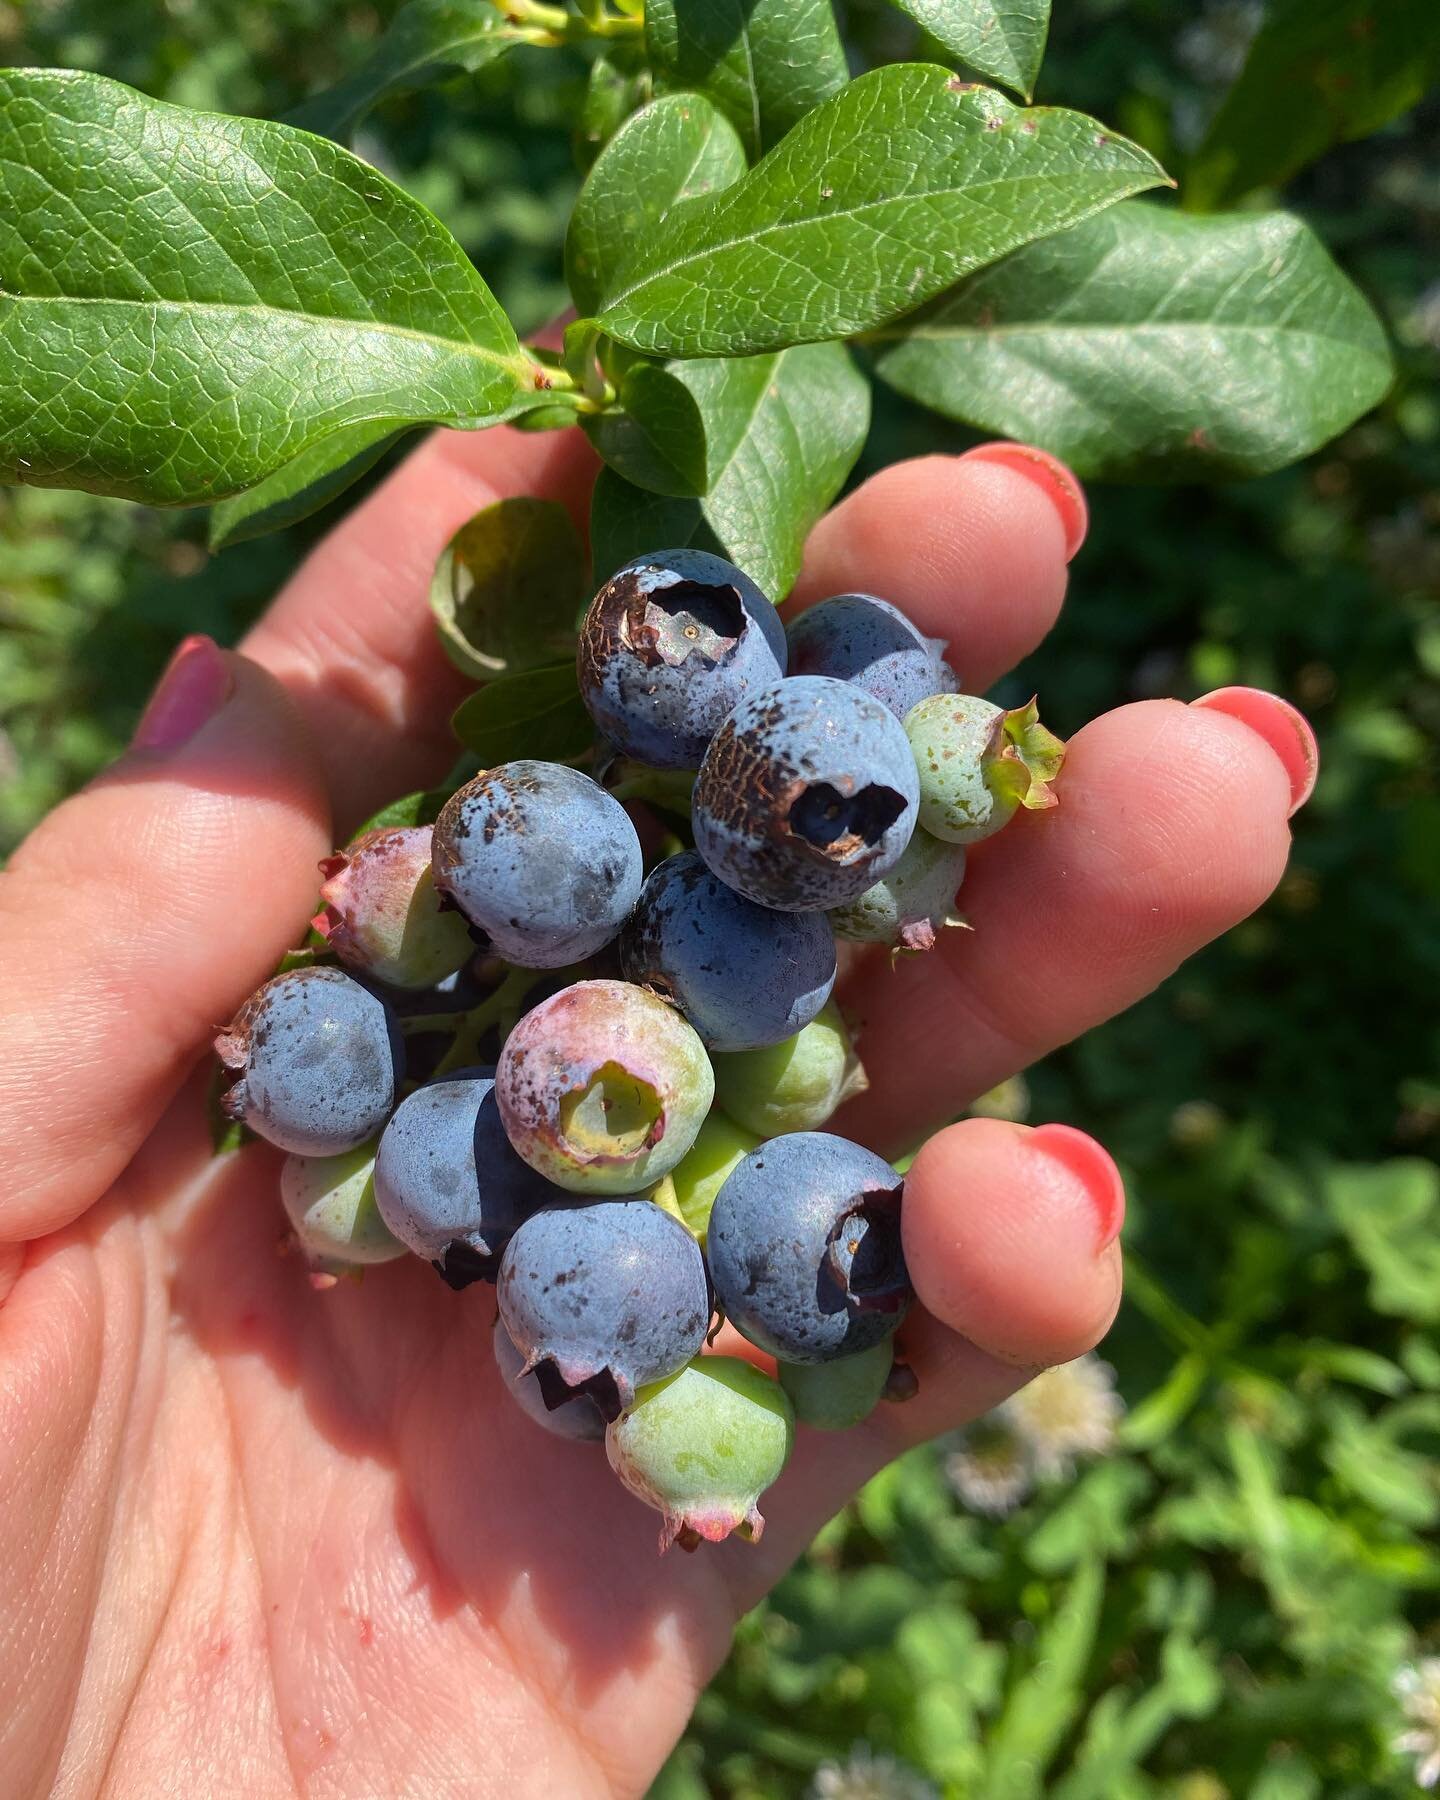 Make a memory every month before goodbye.
We explored the blueberry patch and found abundance. 
Abundance in the growing season is colorful and plenty. It is a constant harvest of fruits, veggies, herbs, and grains. 
We gather and store and preserve 